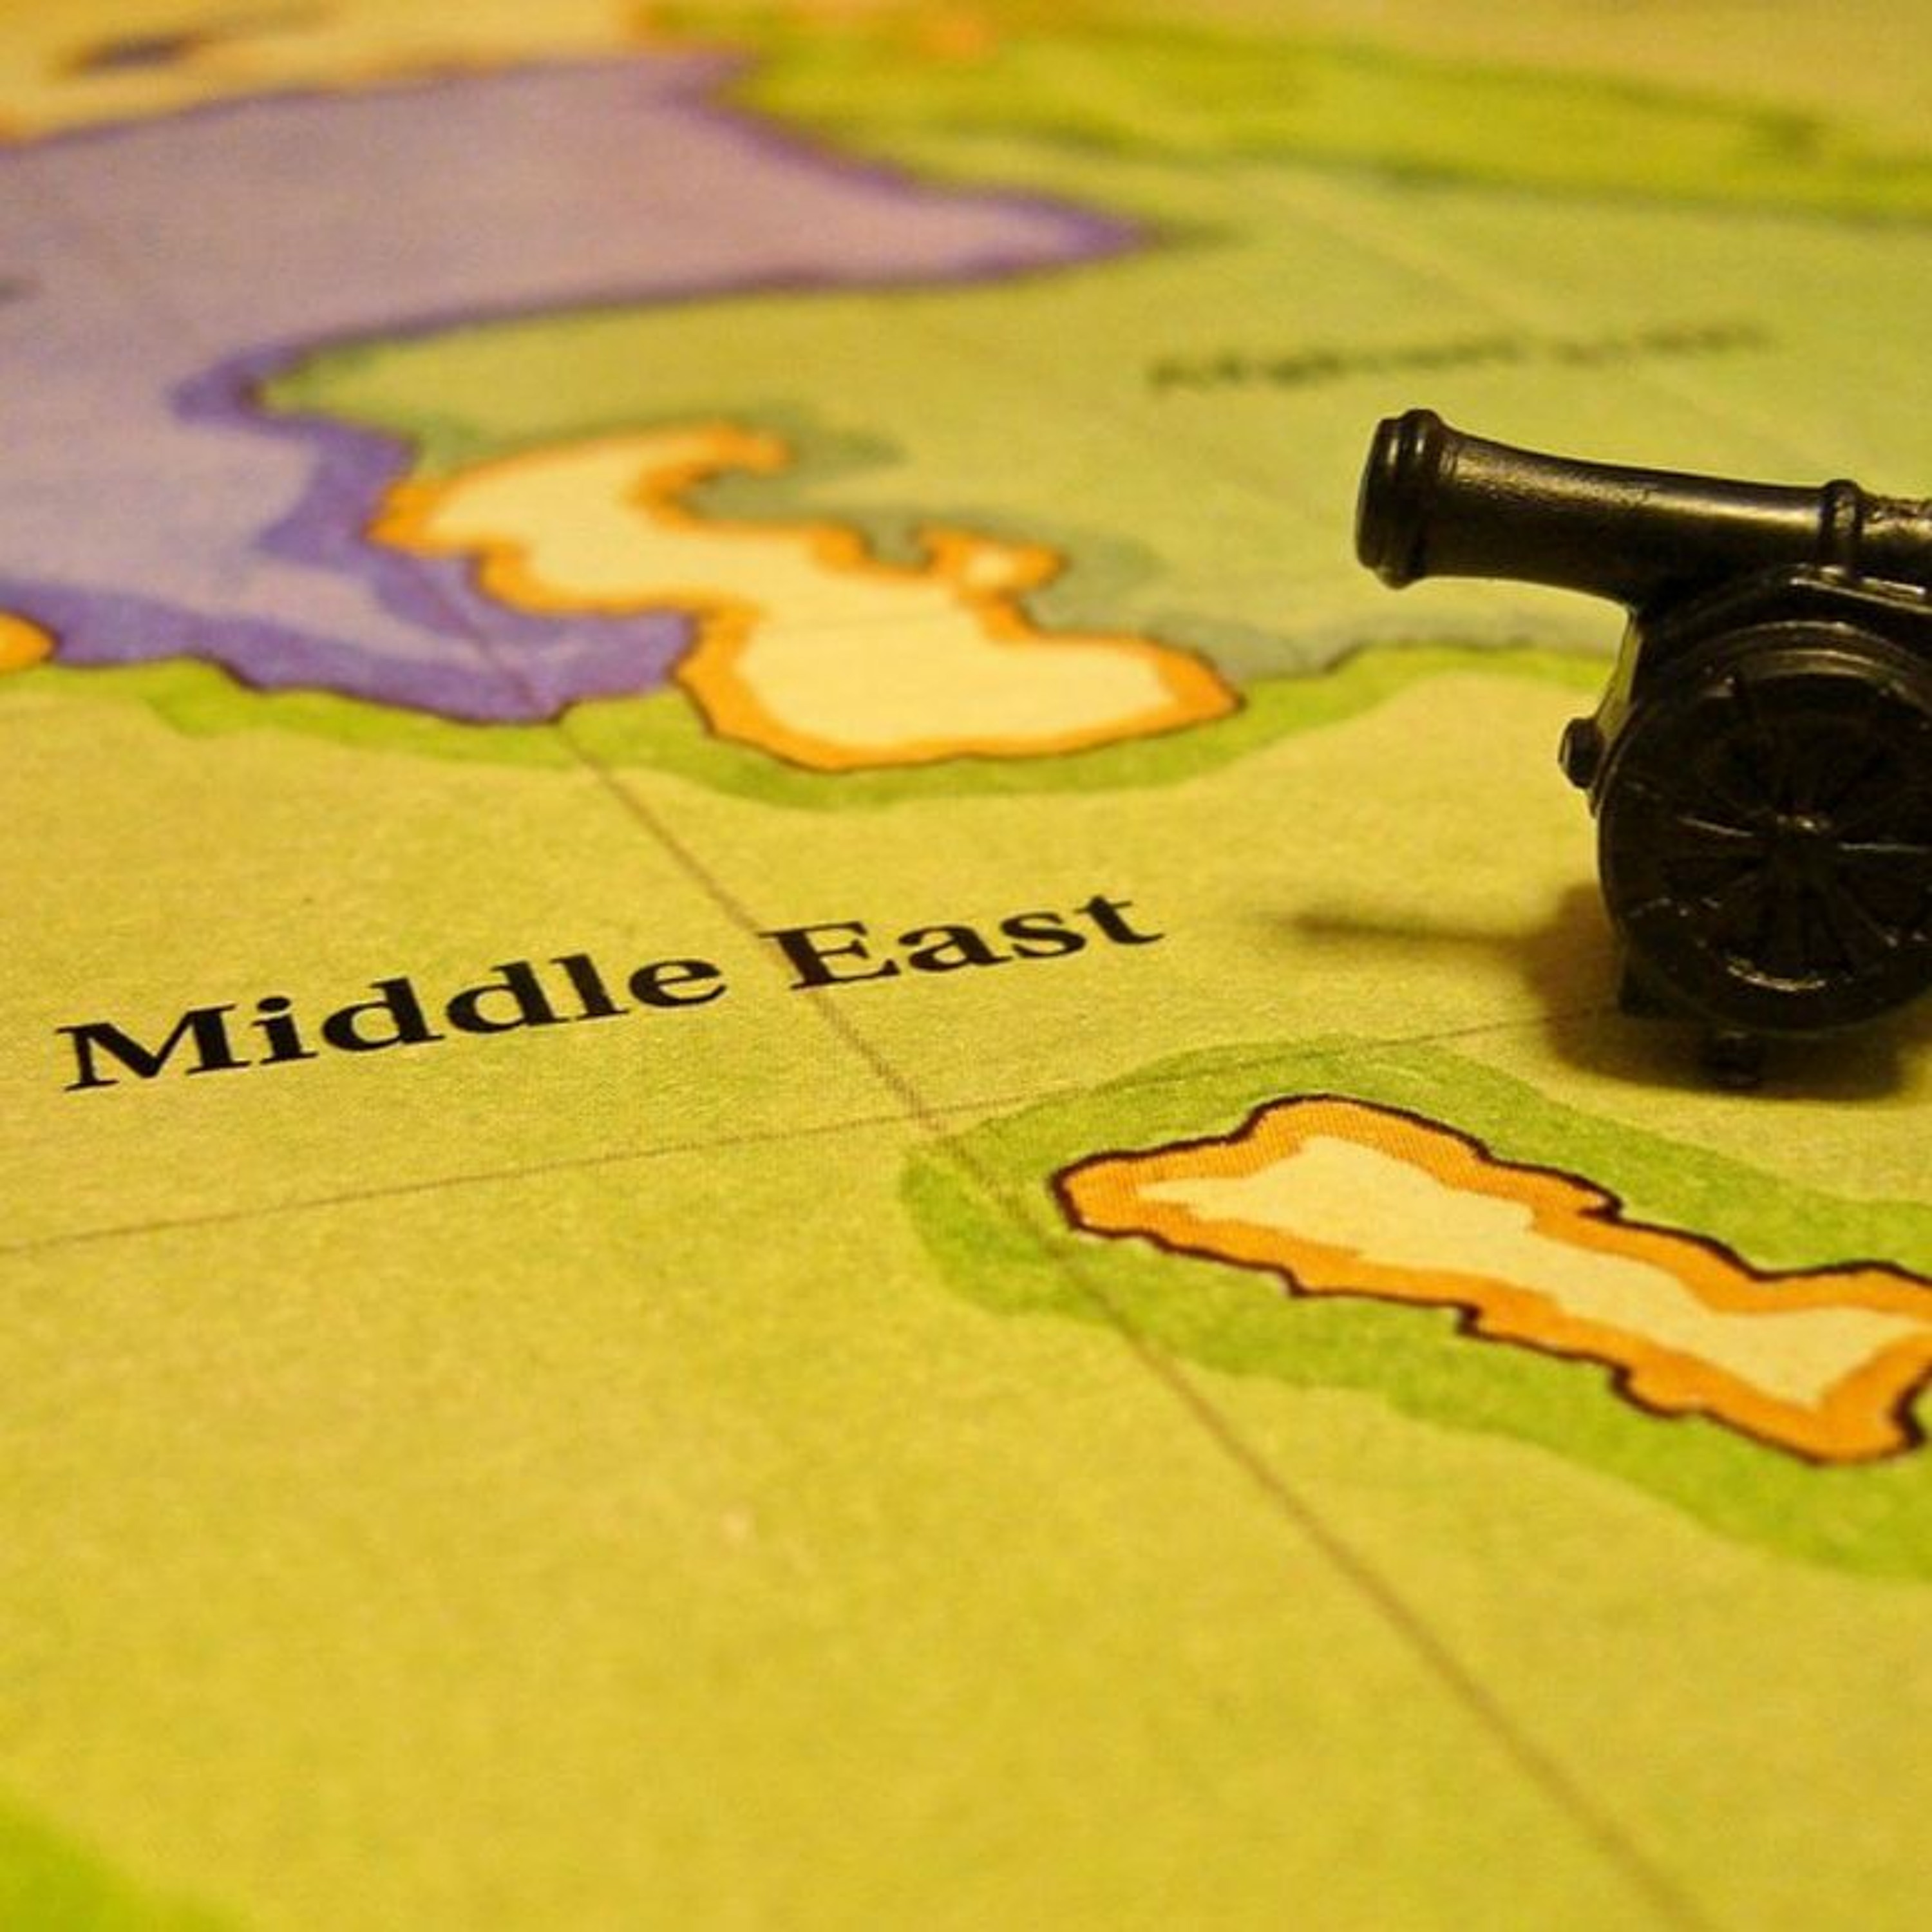 War in the Middle East!